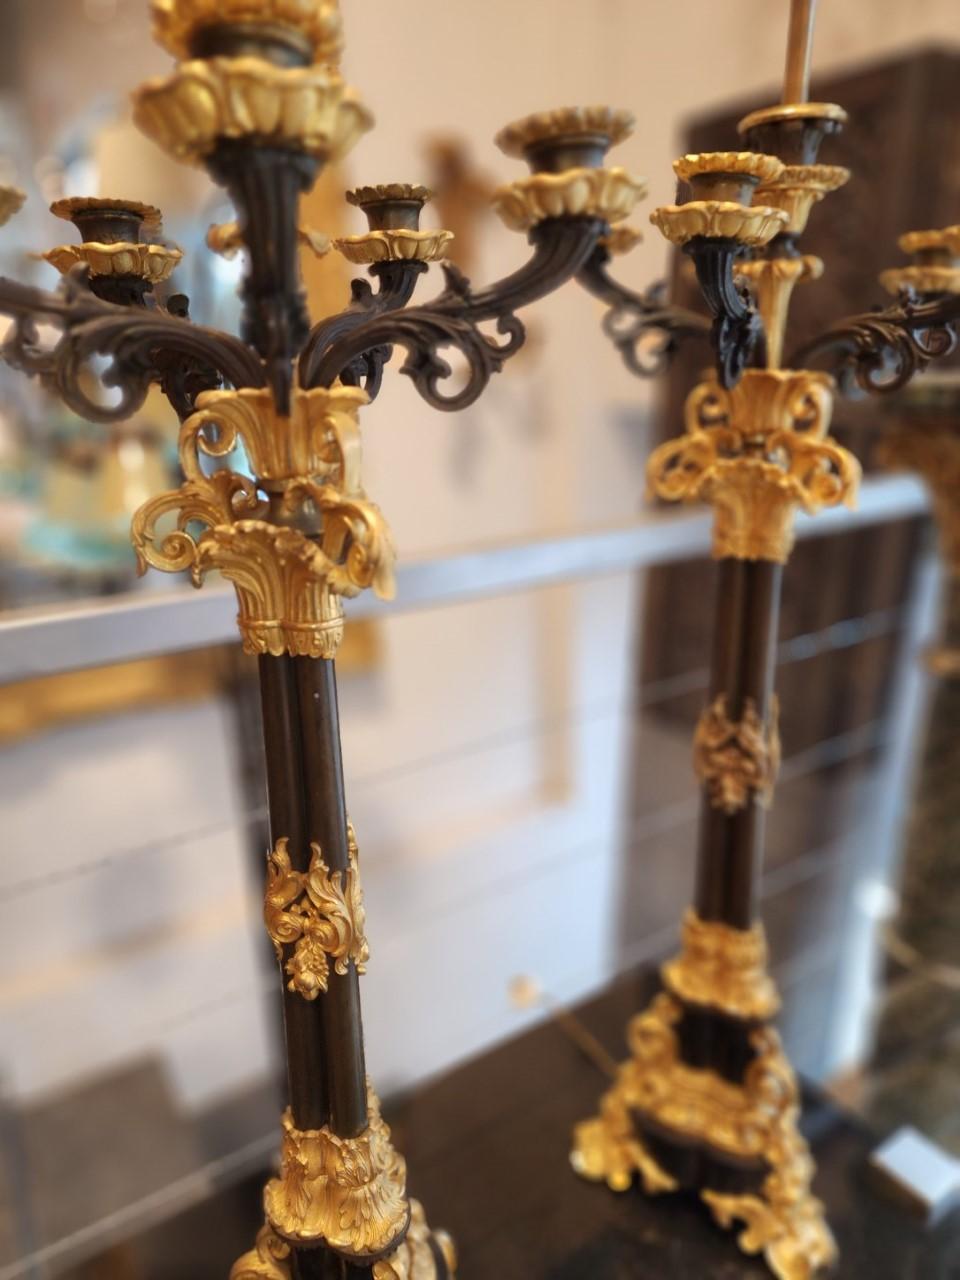 Gorgeous pair of 19th century French Rococo Dore bronze candelabra lamps.
With all original parts. In perfect condition.